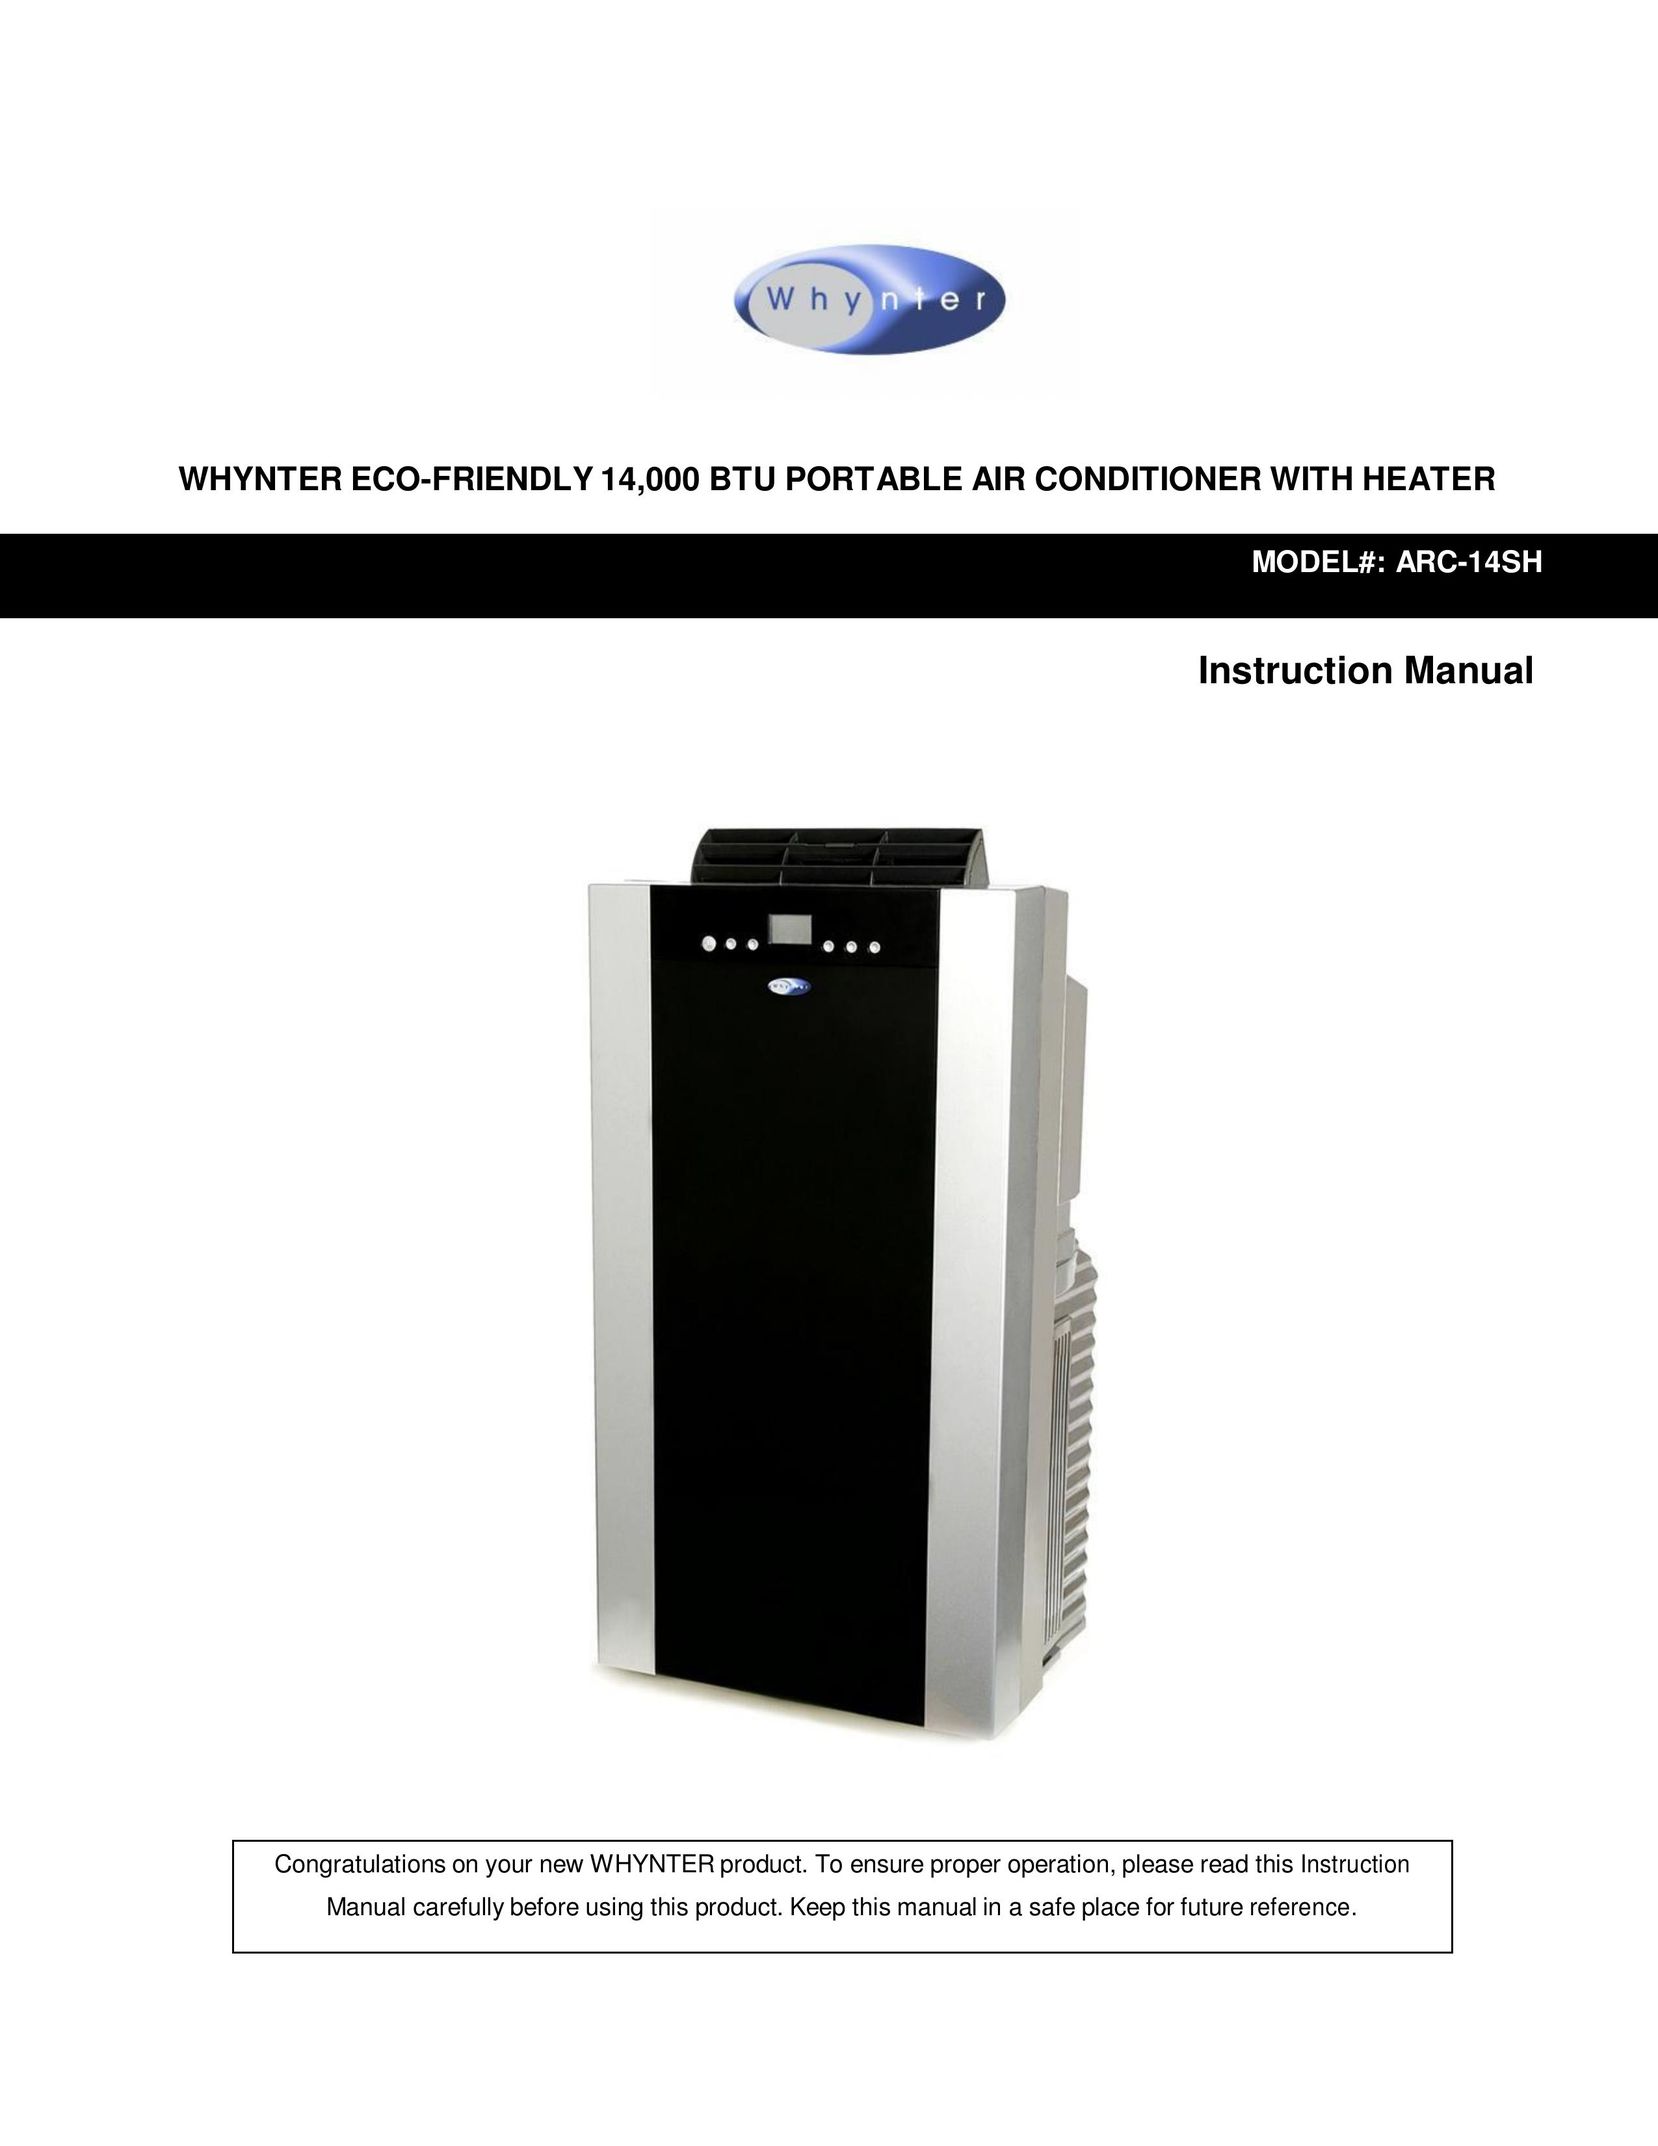 Whynter ARC-14SH Air Conditioner User Manual